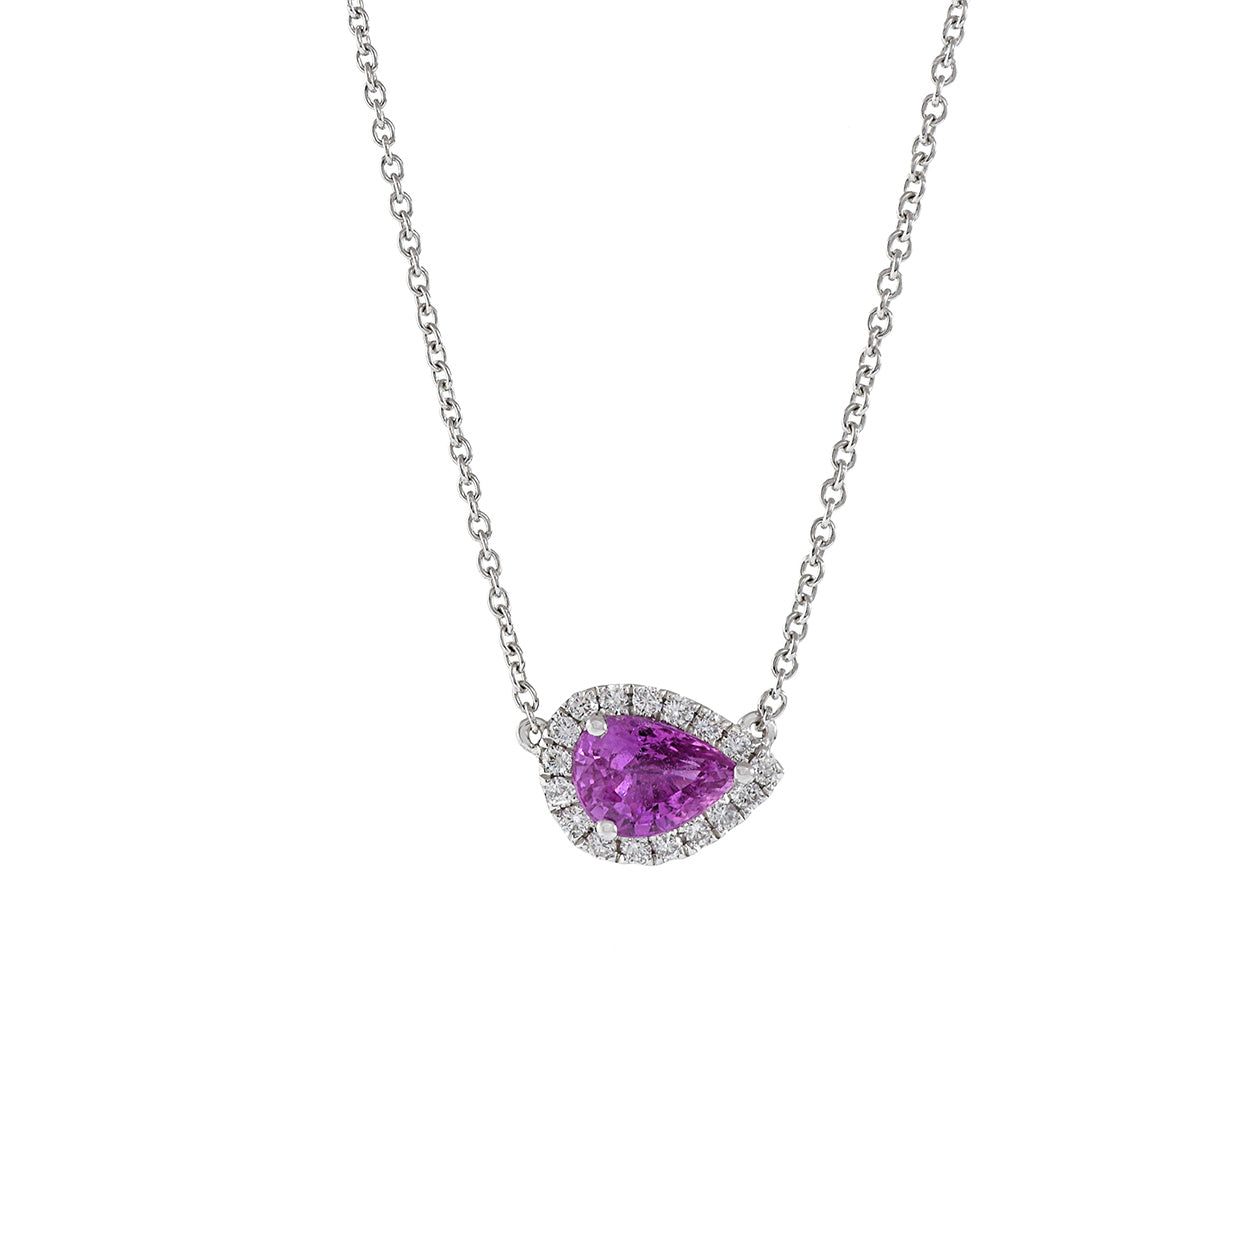 18KT White Gold Pink Sapphire And Diamond Pear Shaped Pendant Necklace